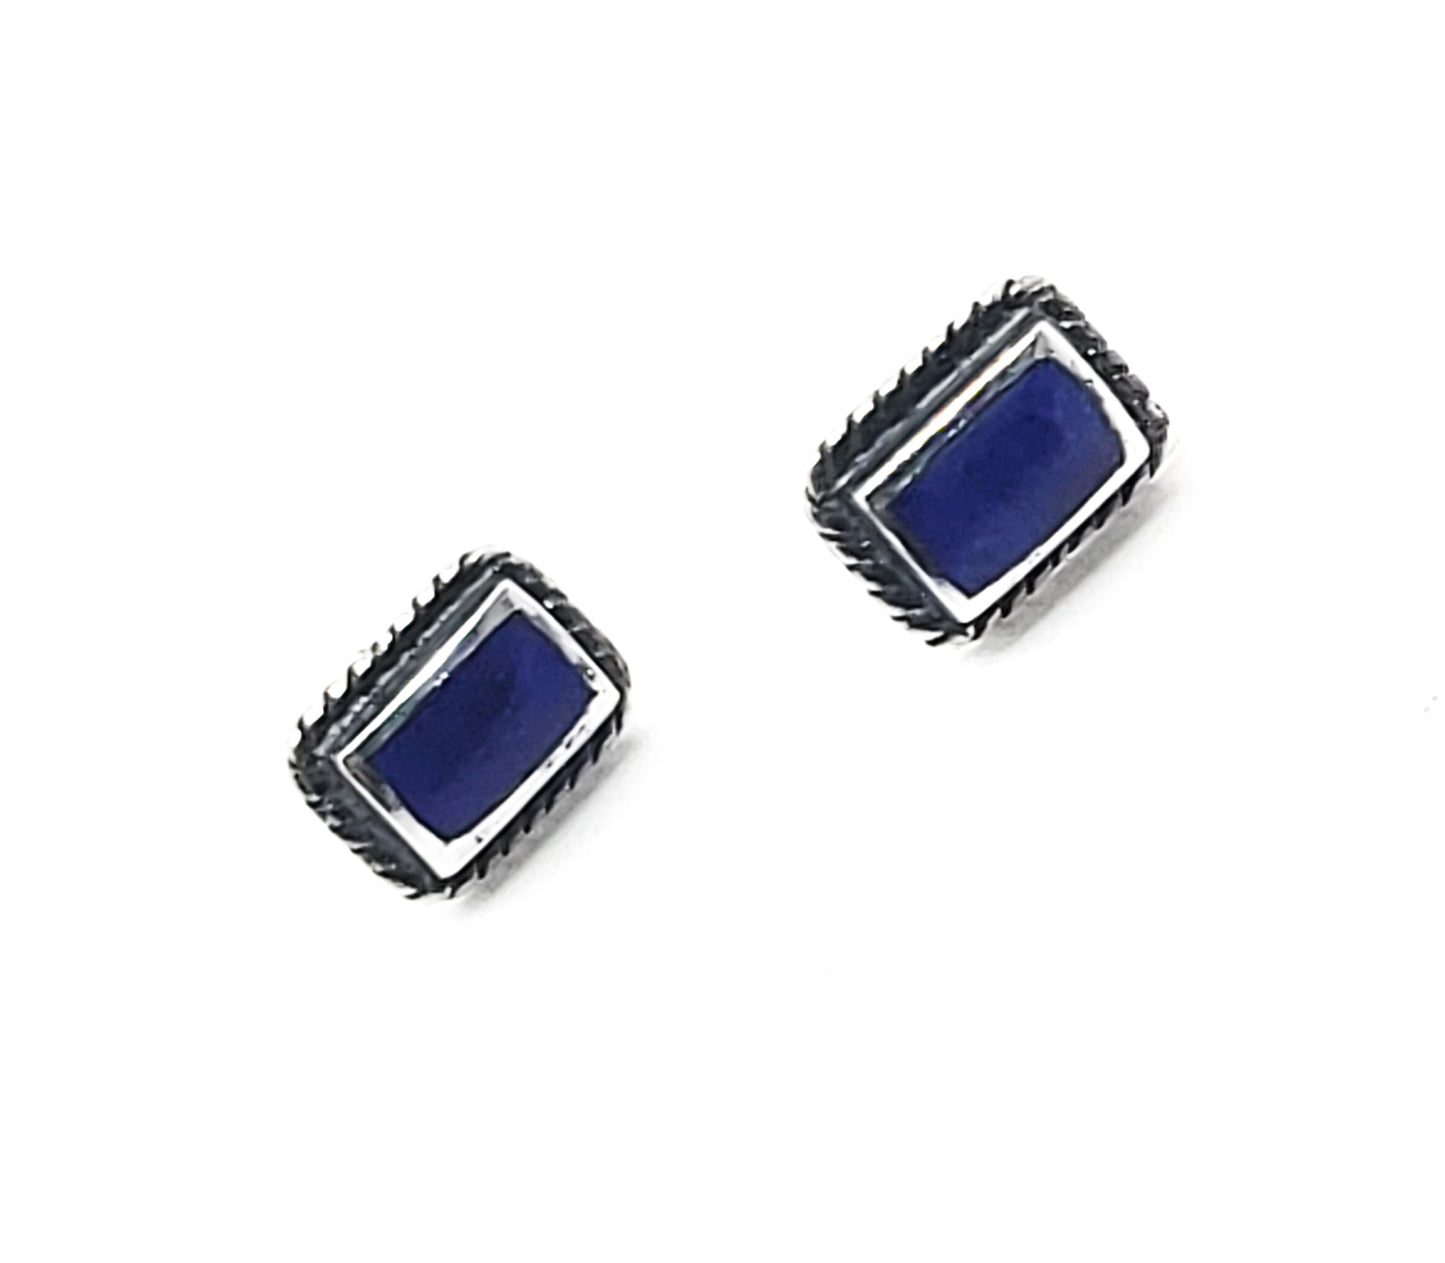 Lapis Lazuli small twisted rope vintage sterling silver signed stud post earrings 925